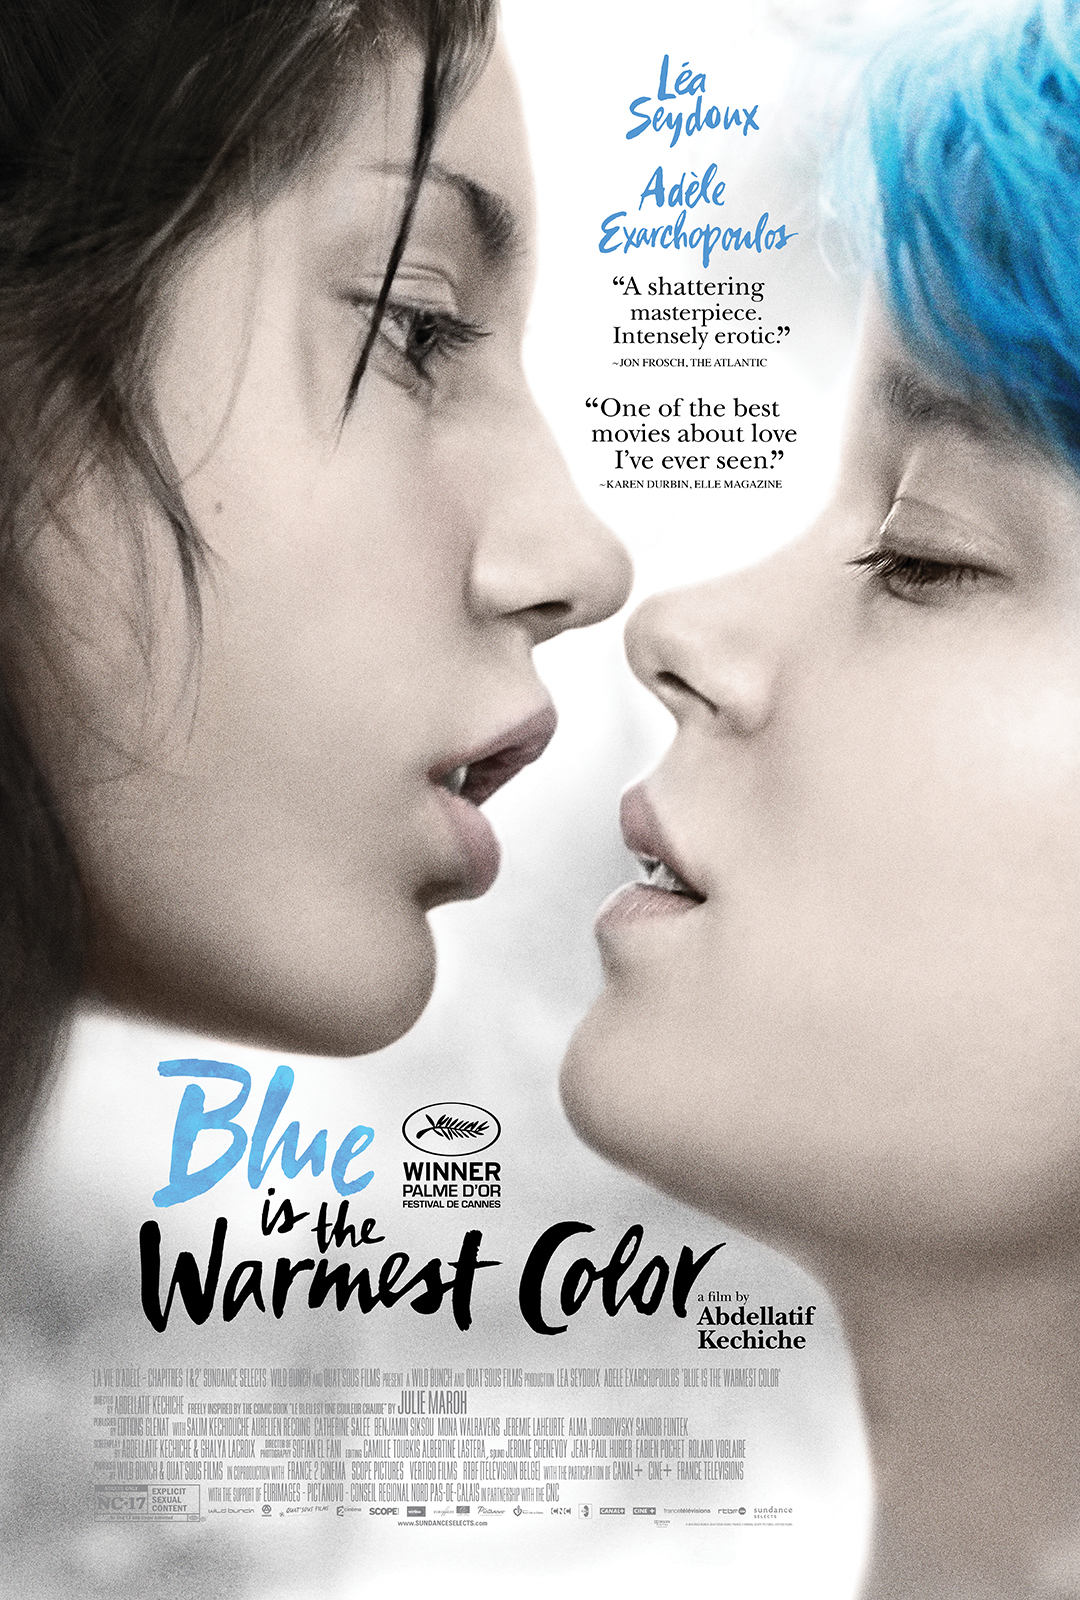 Blue is a warmest color INDEED!!!